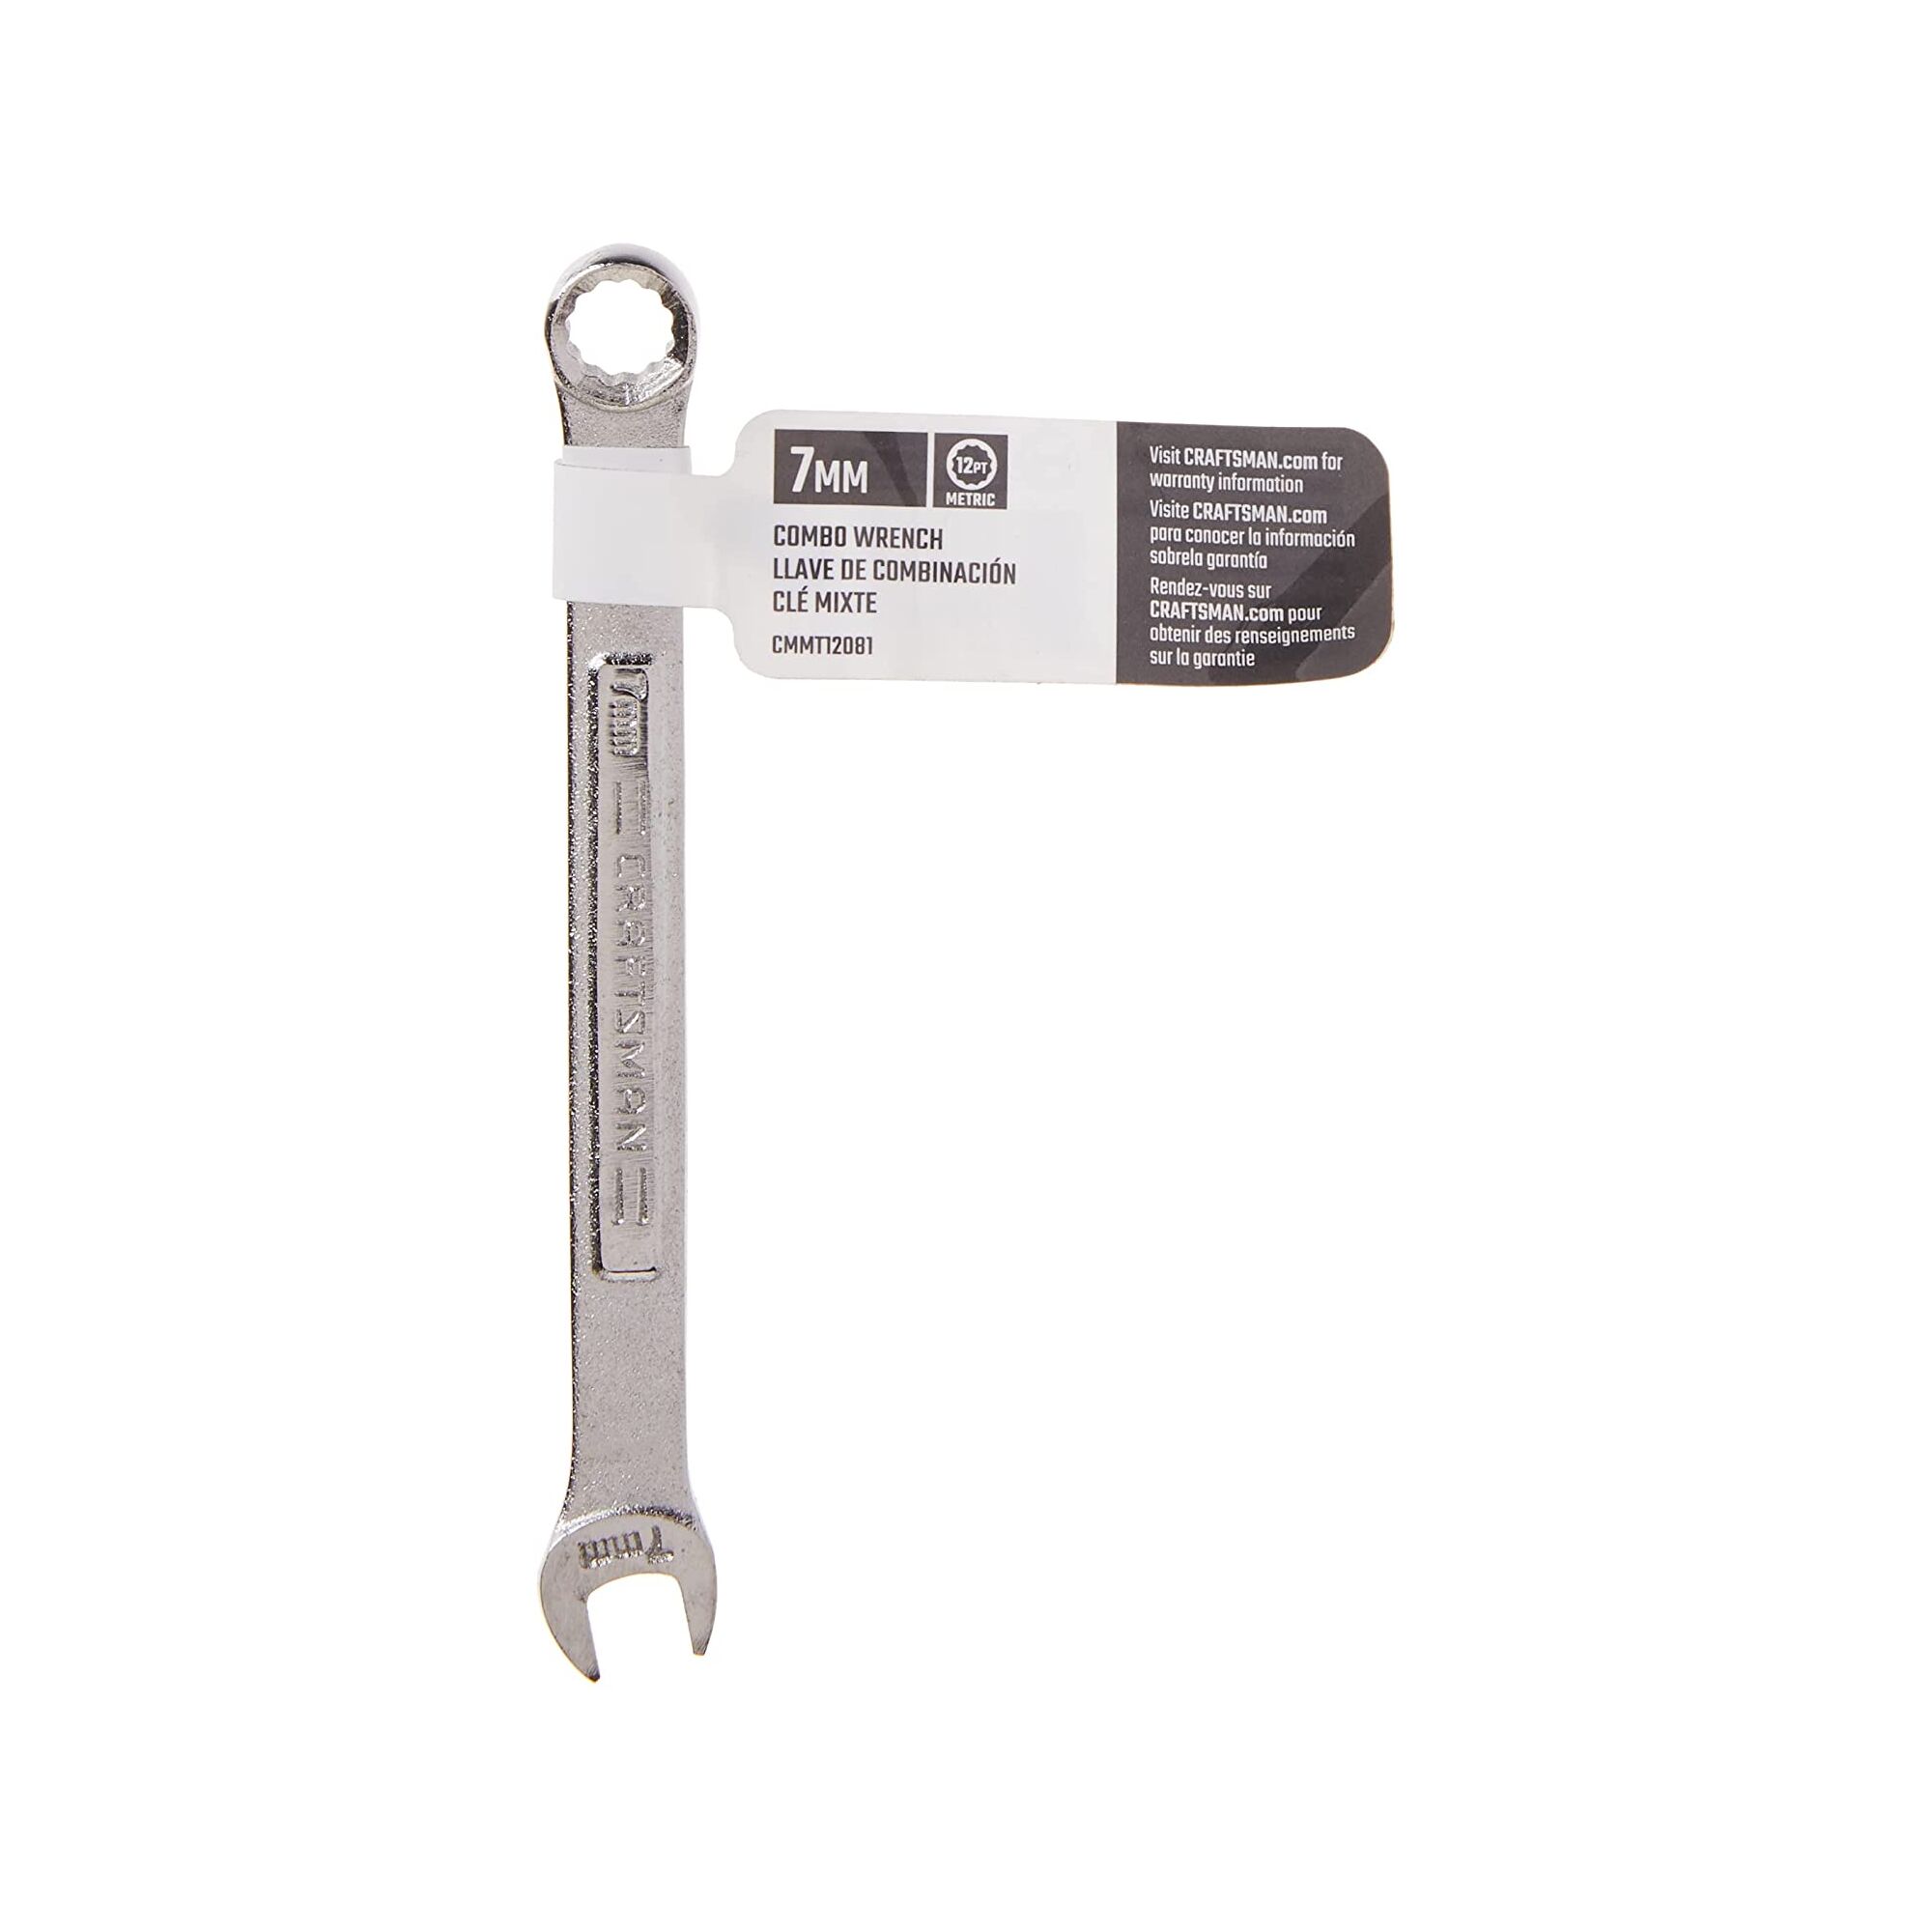 View of CRAFTSMAN Wrenches: Combination packaging